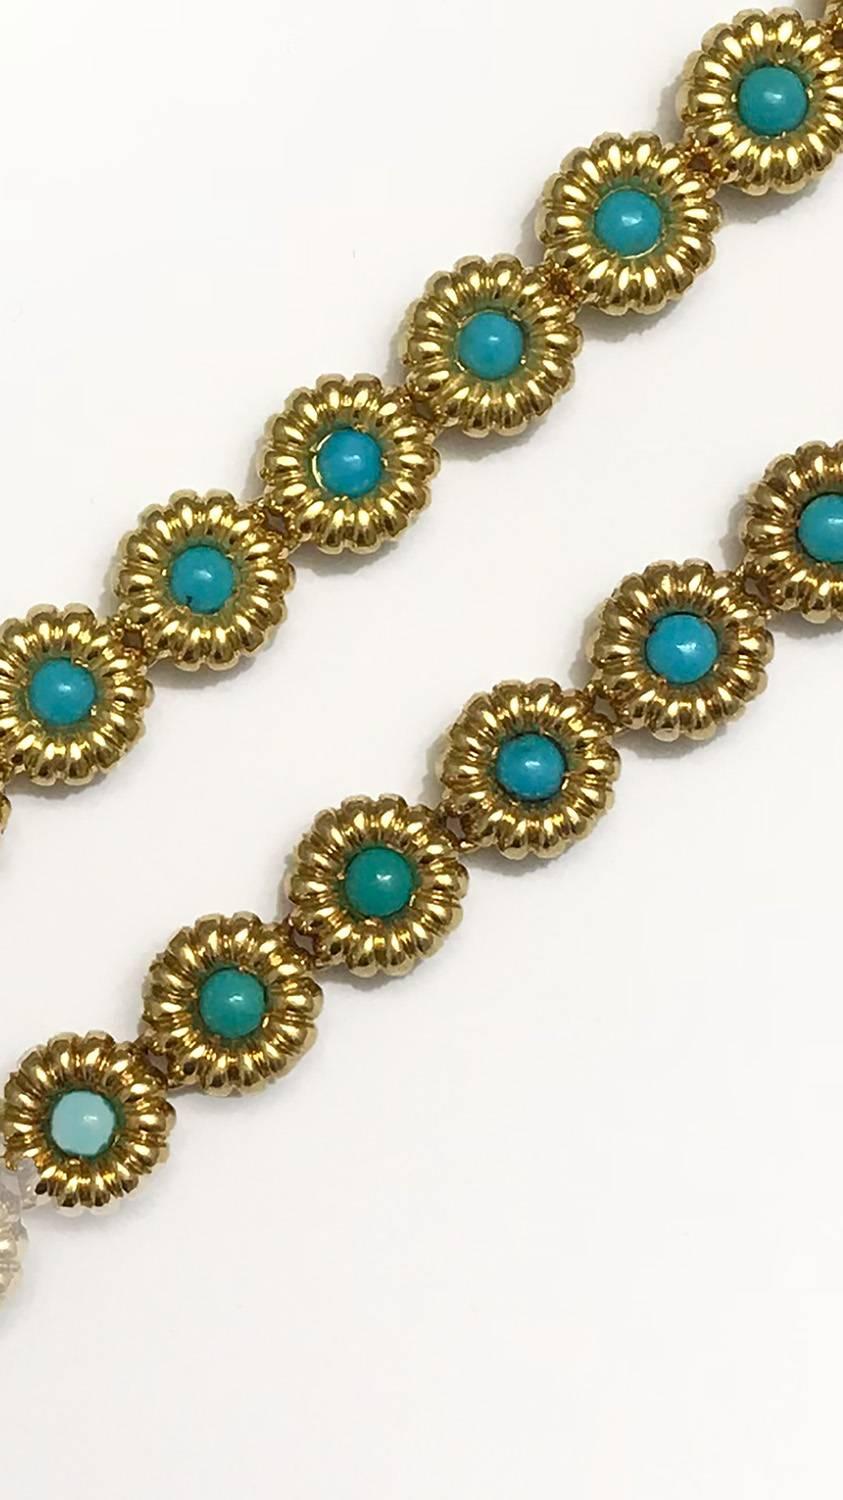 18 Karat Yellow Gold Turquoise Bracelets or Choker Necklace For Sale 13